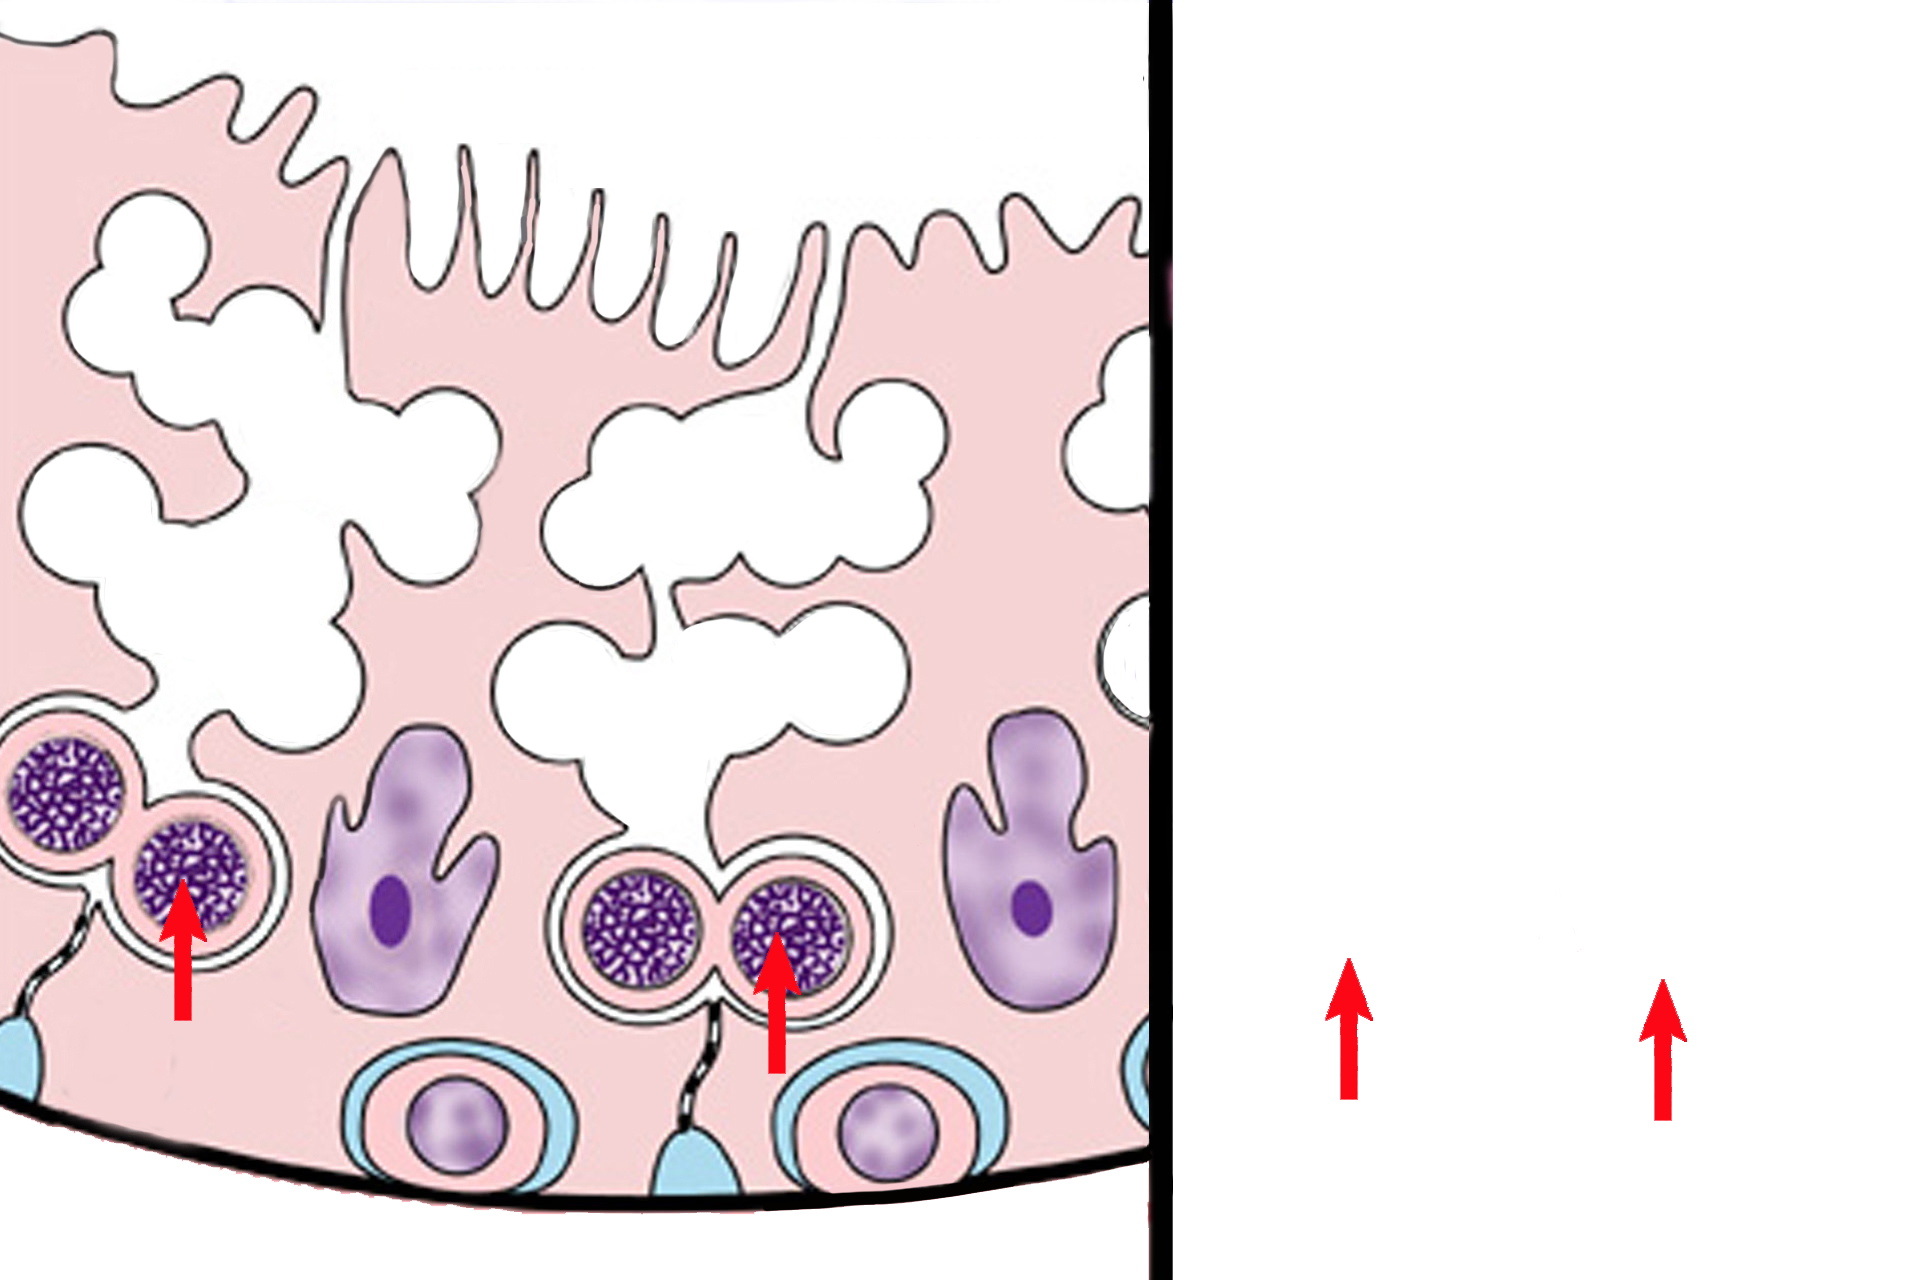  - Primary spermatocytes > <p>Primary spermatocytes are diploid cells formed by mitosis of spermatogonia. Primary spermatocytes form in the basal compartment but soon move through the blood-testis barrier into the adluminal compartment.  Their nuclei are about 150% that of spermatogonia nuclei. Primary spermatocytes arrest in prophase of meiosis I, so many of these cells, with condensed chromosomes, are visible.</p>
